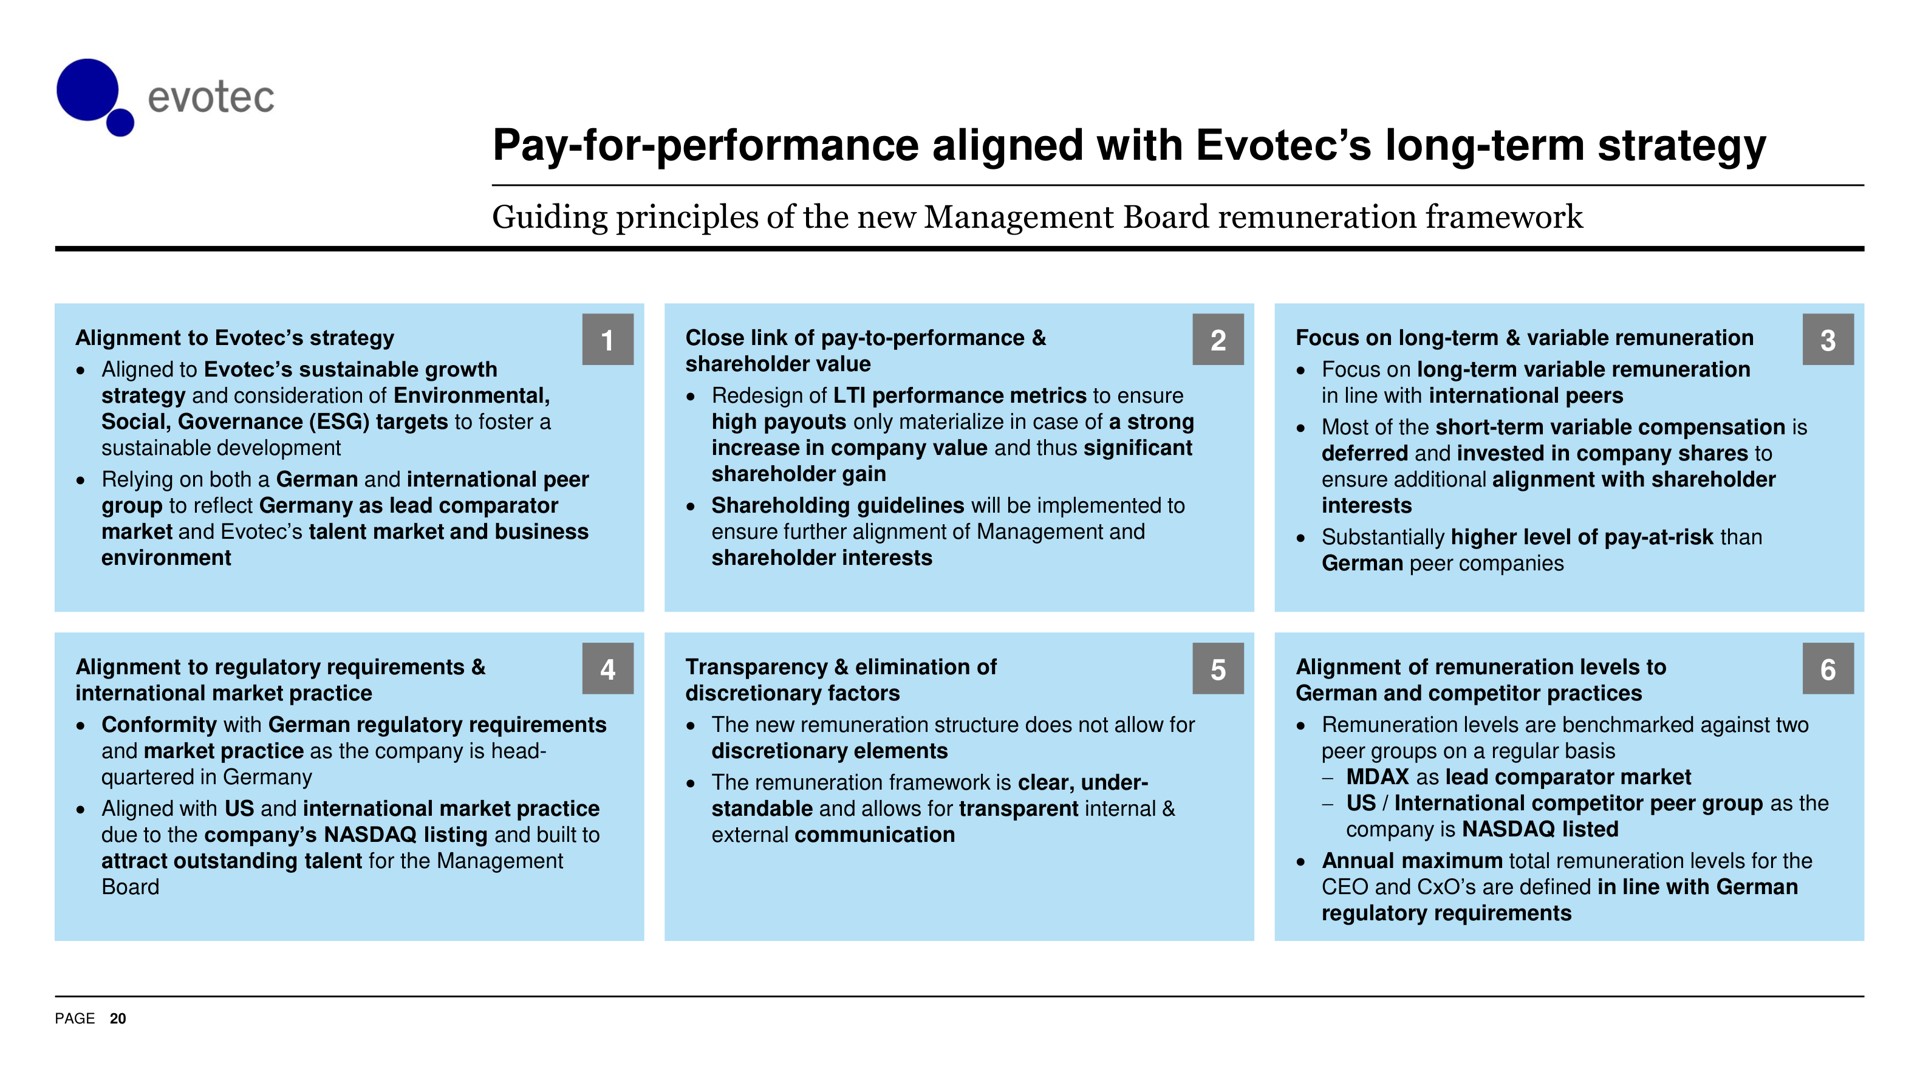 pay for performance aligned with long term strategy | Evotec